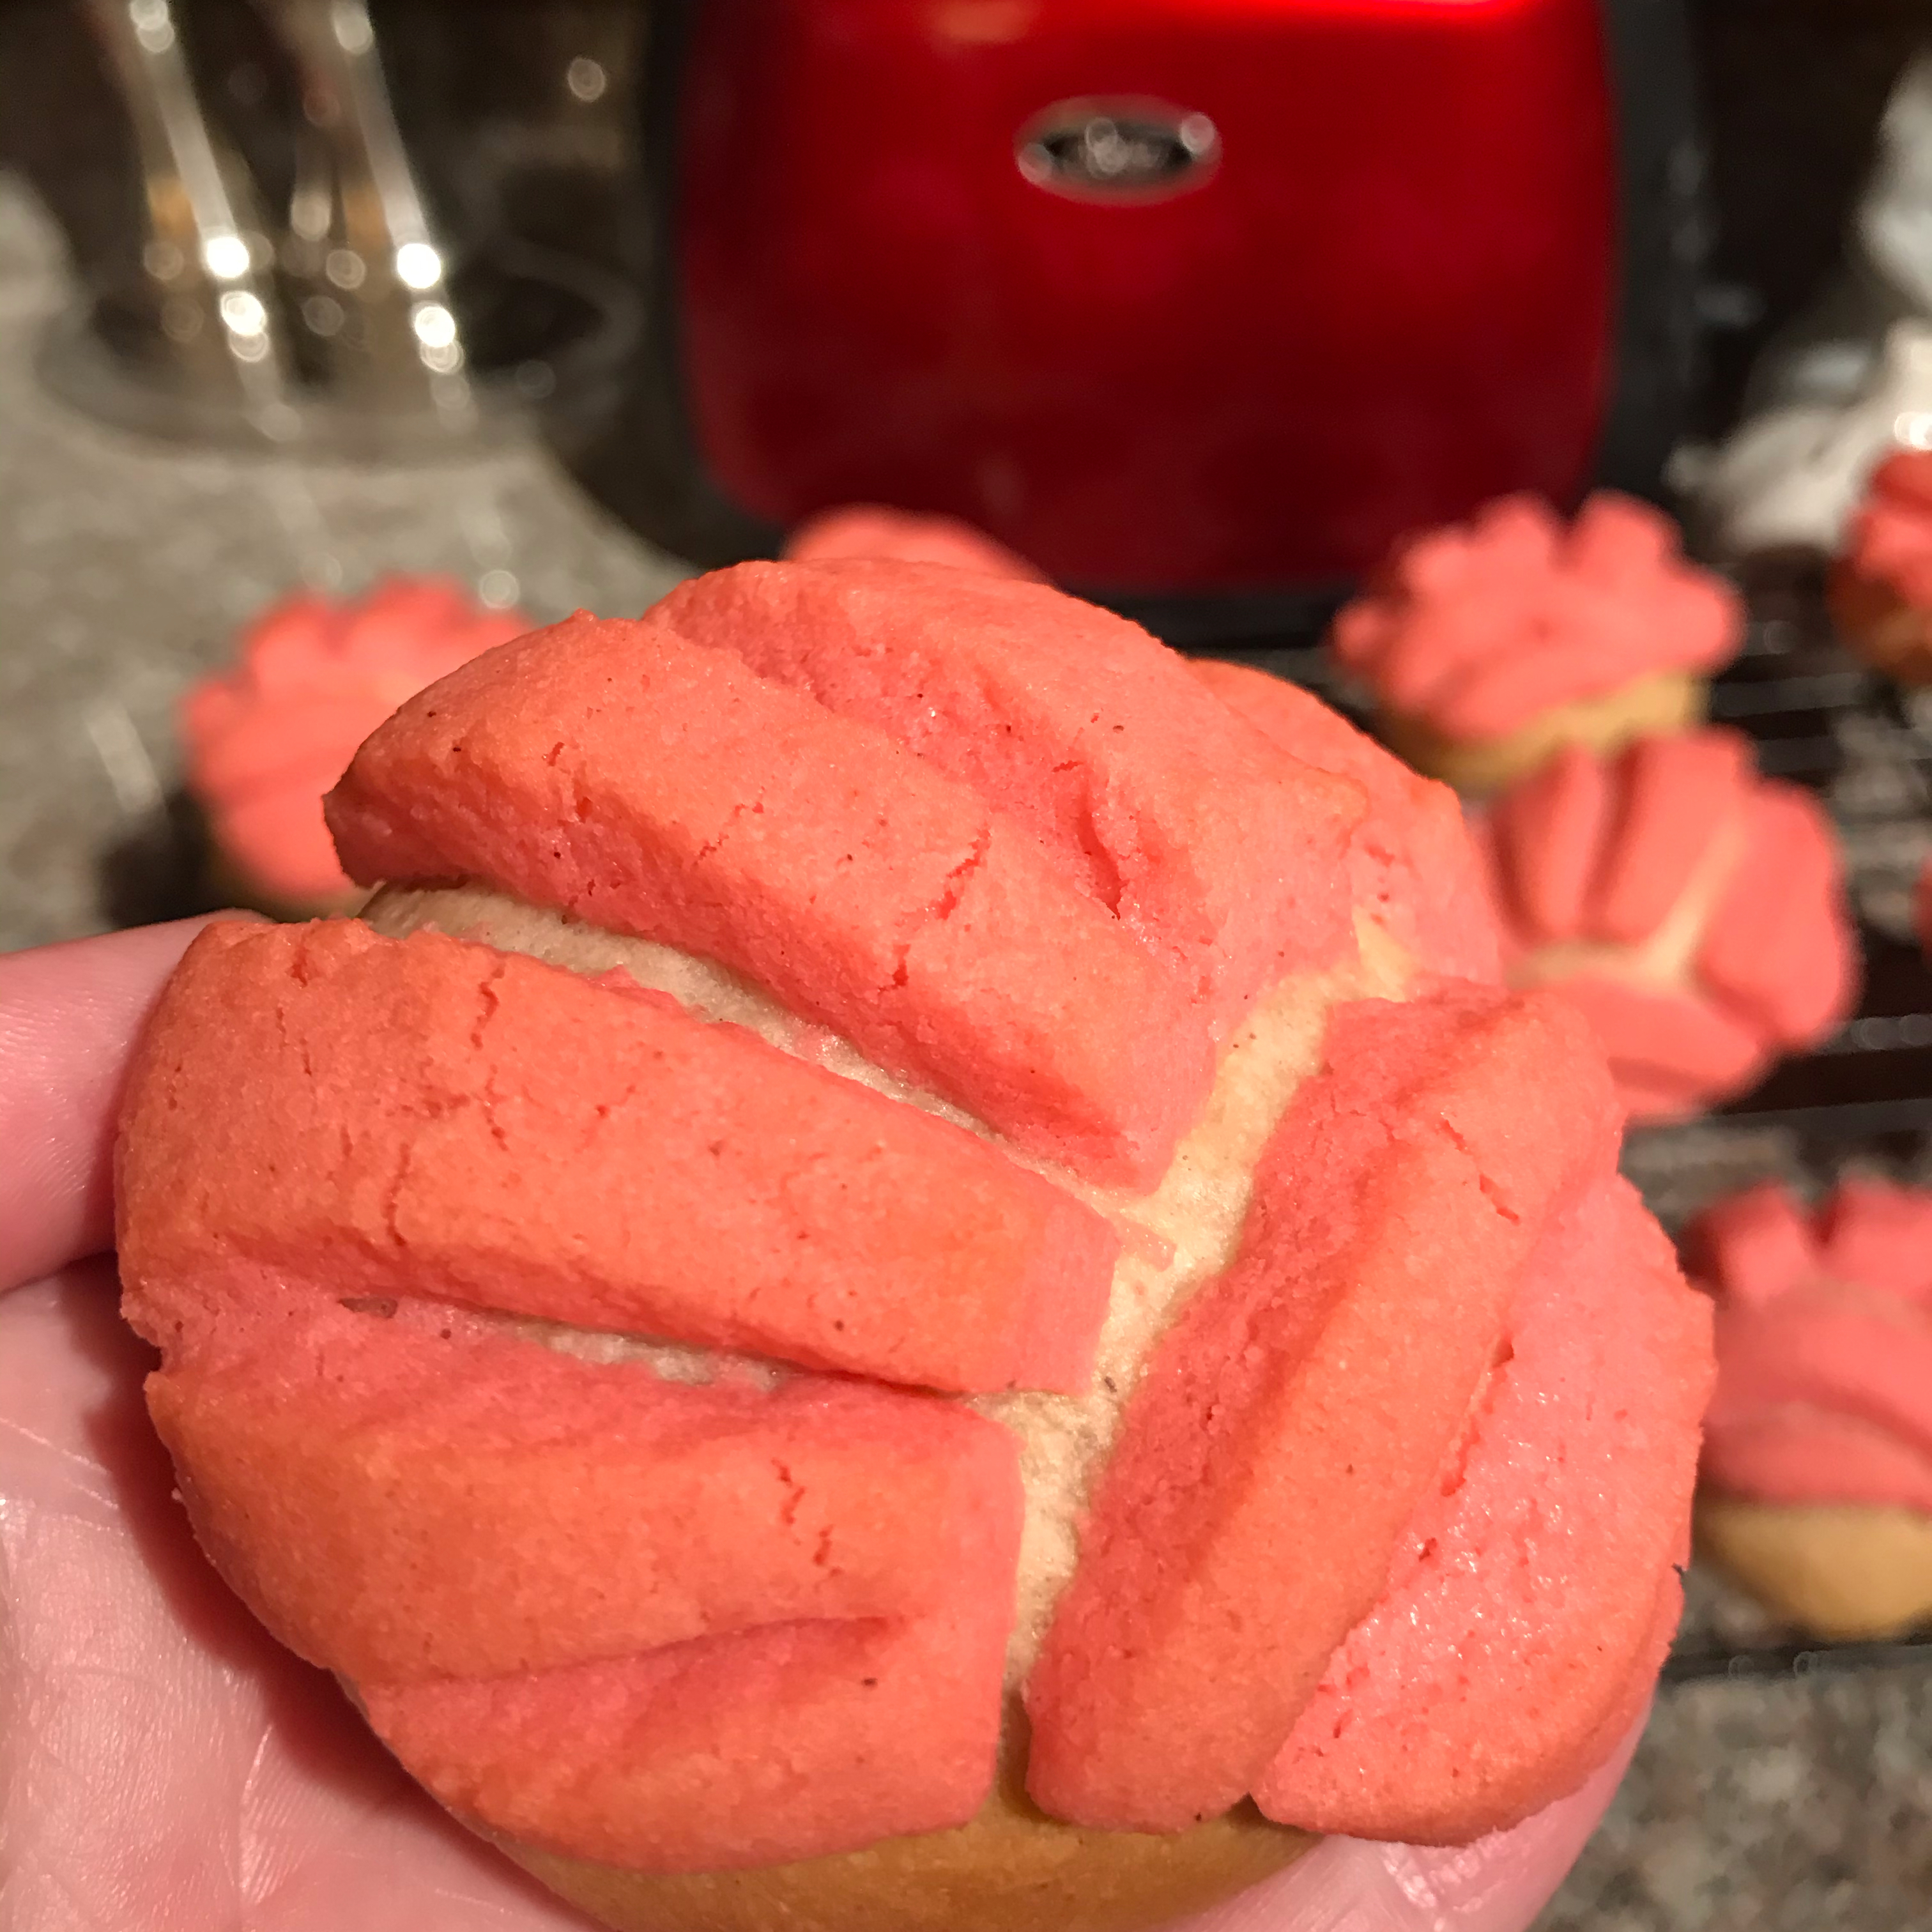 Conchas (Mexican Sweet Bread) 